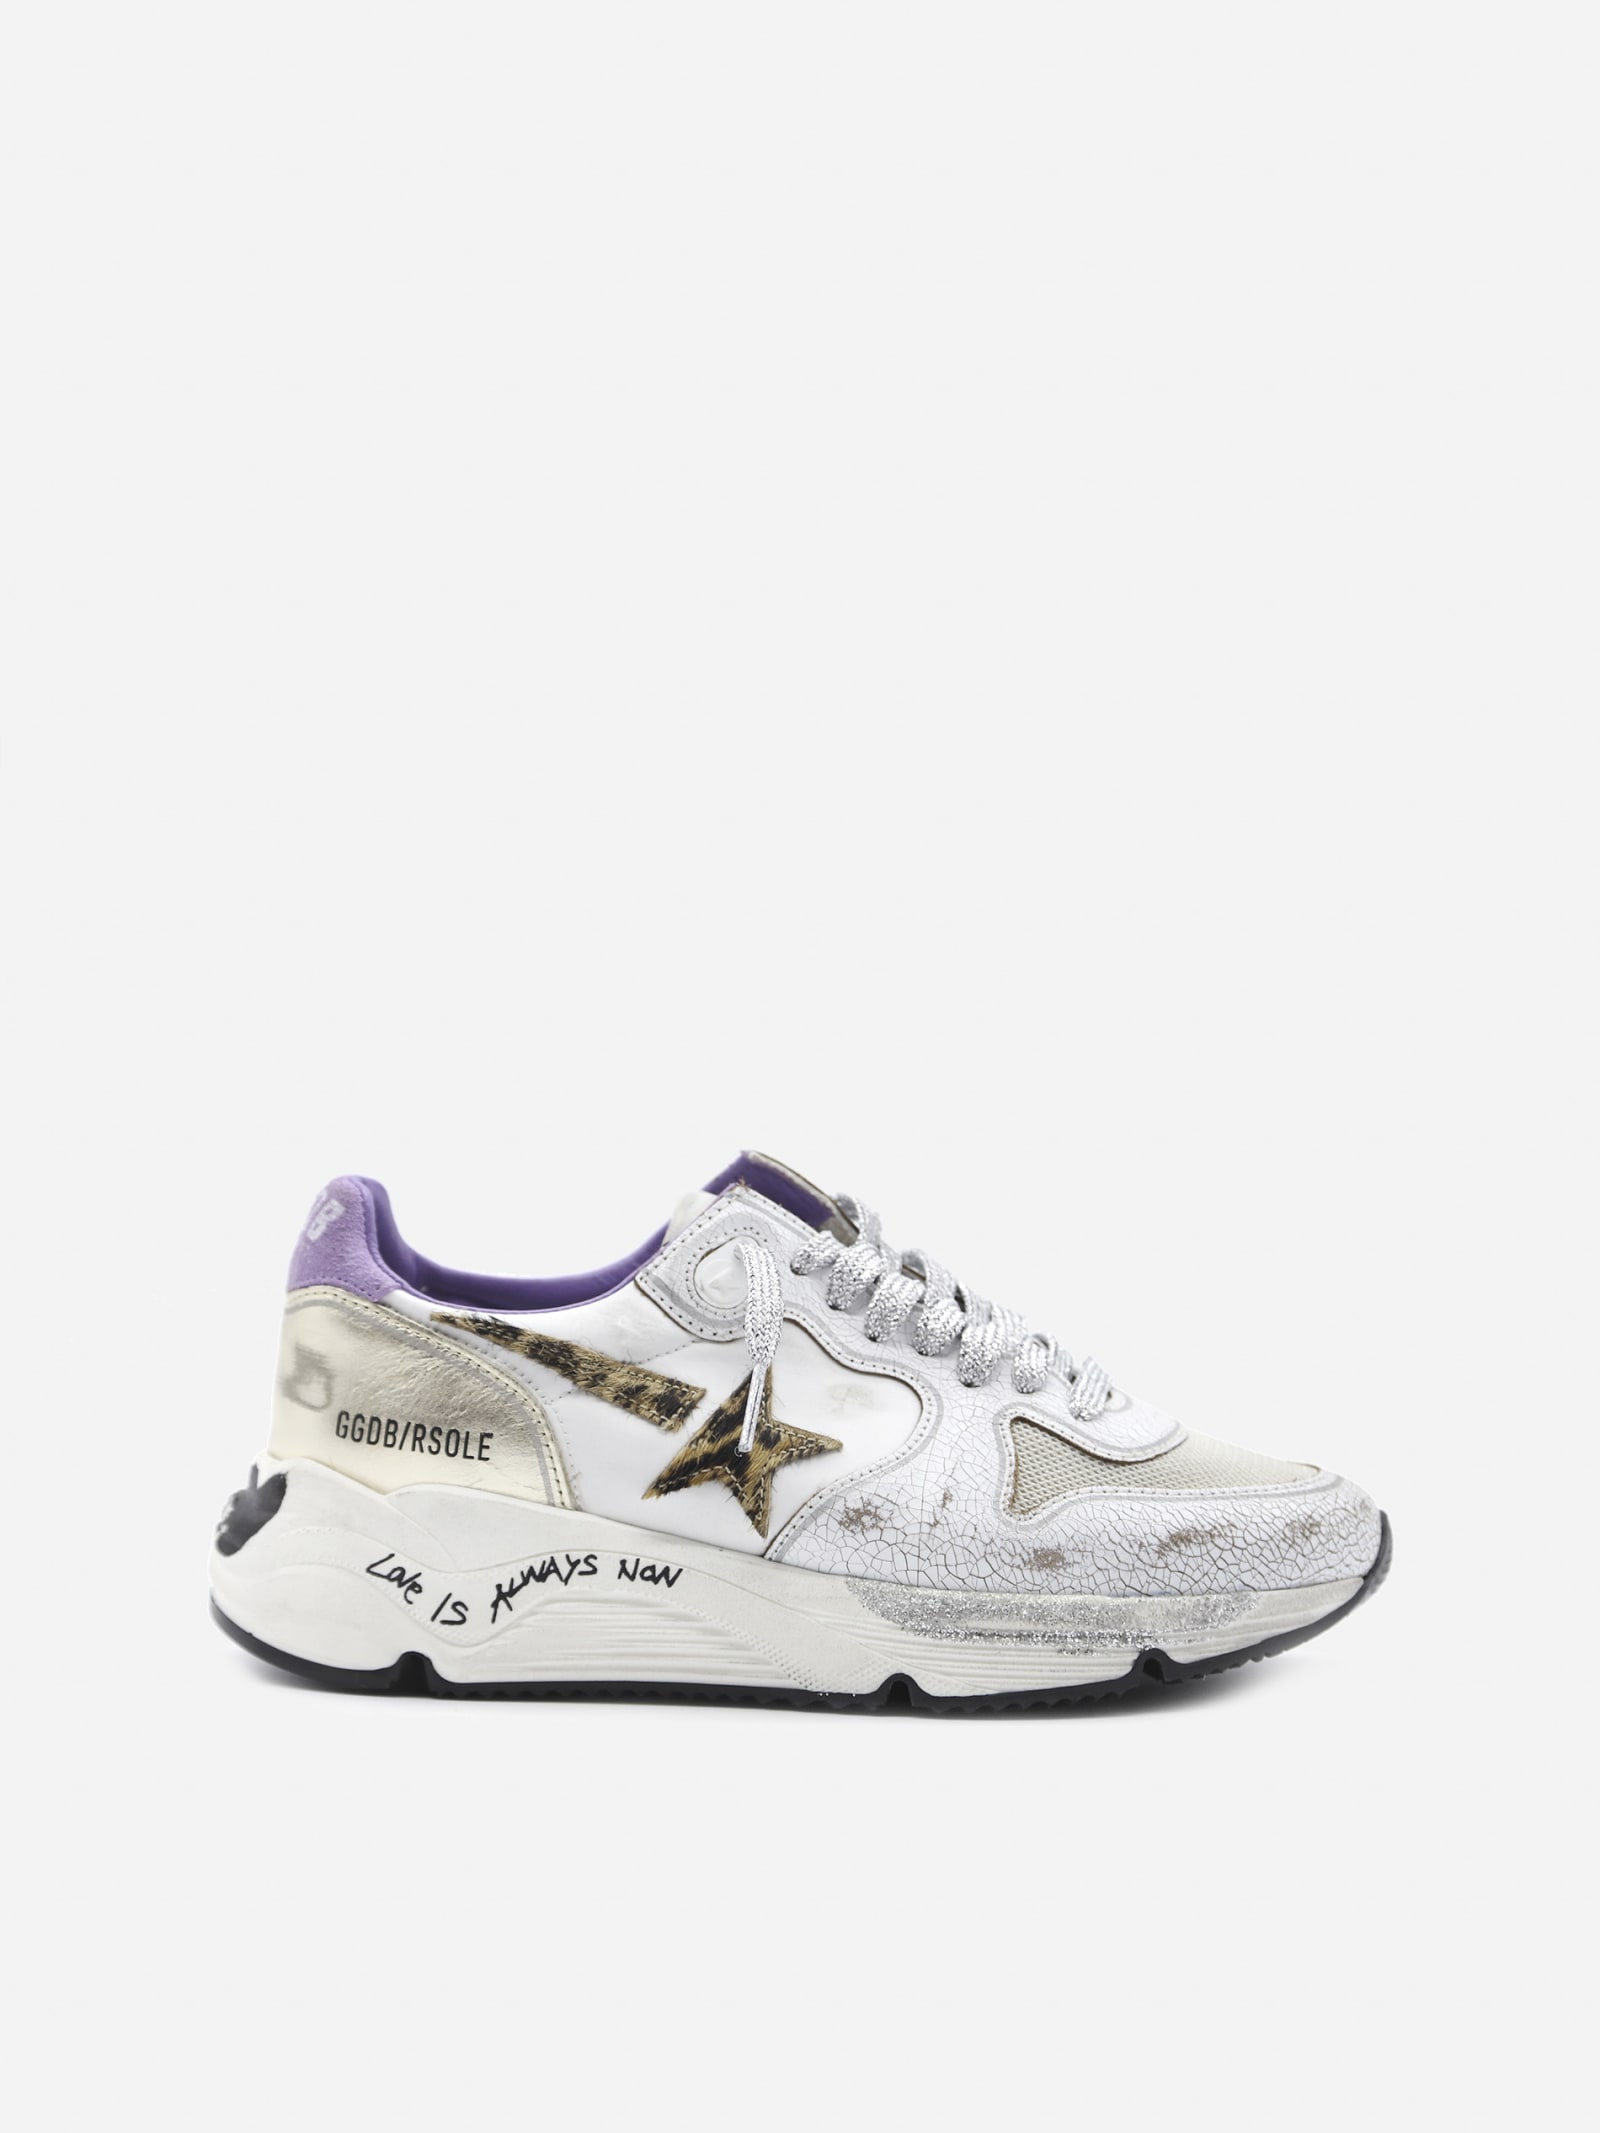 Buy Golden Goose Running Sole Sneakers In Crackle Leather And Nylon online, shop Golden Goose shoes with free shipping